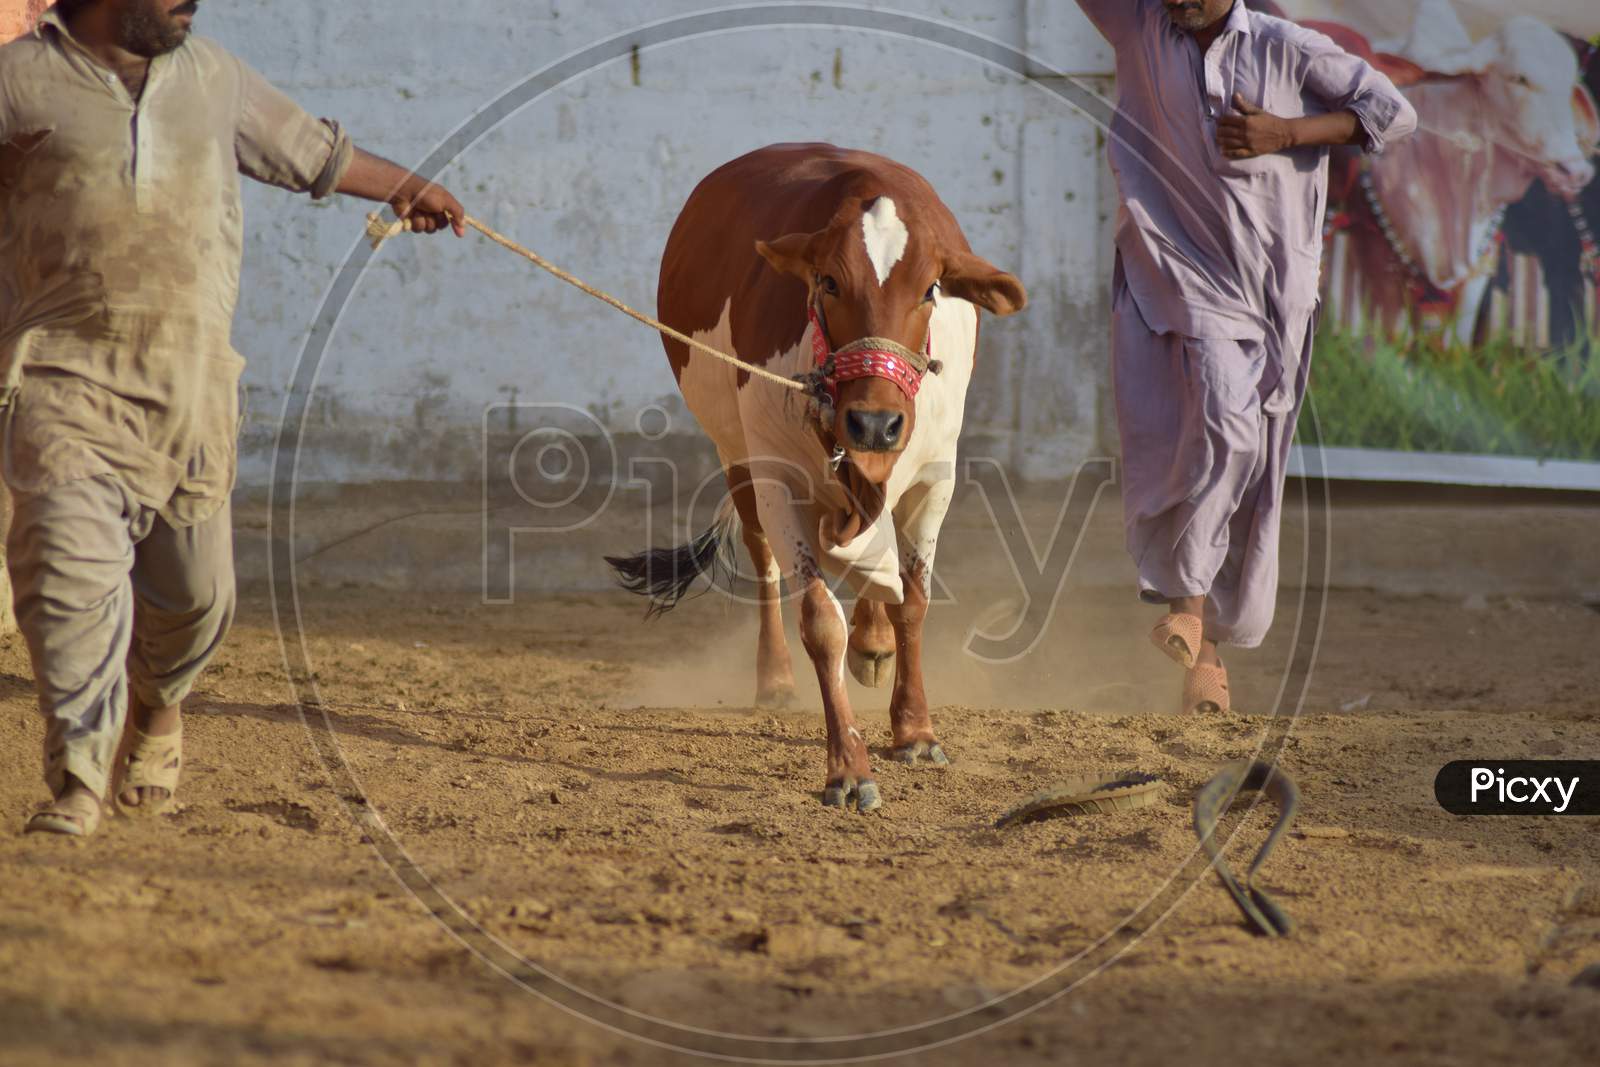 A Bull running in the Cattle Farm